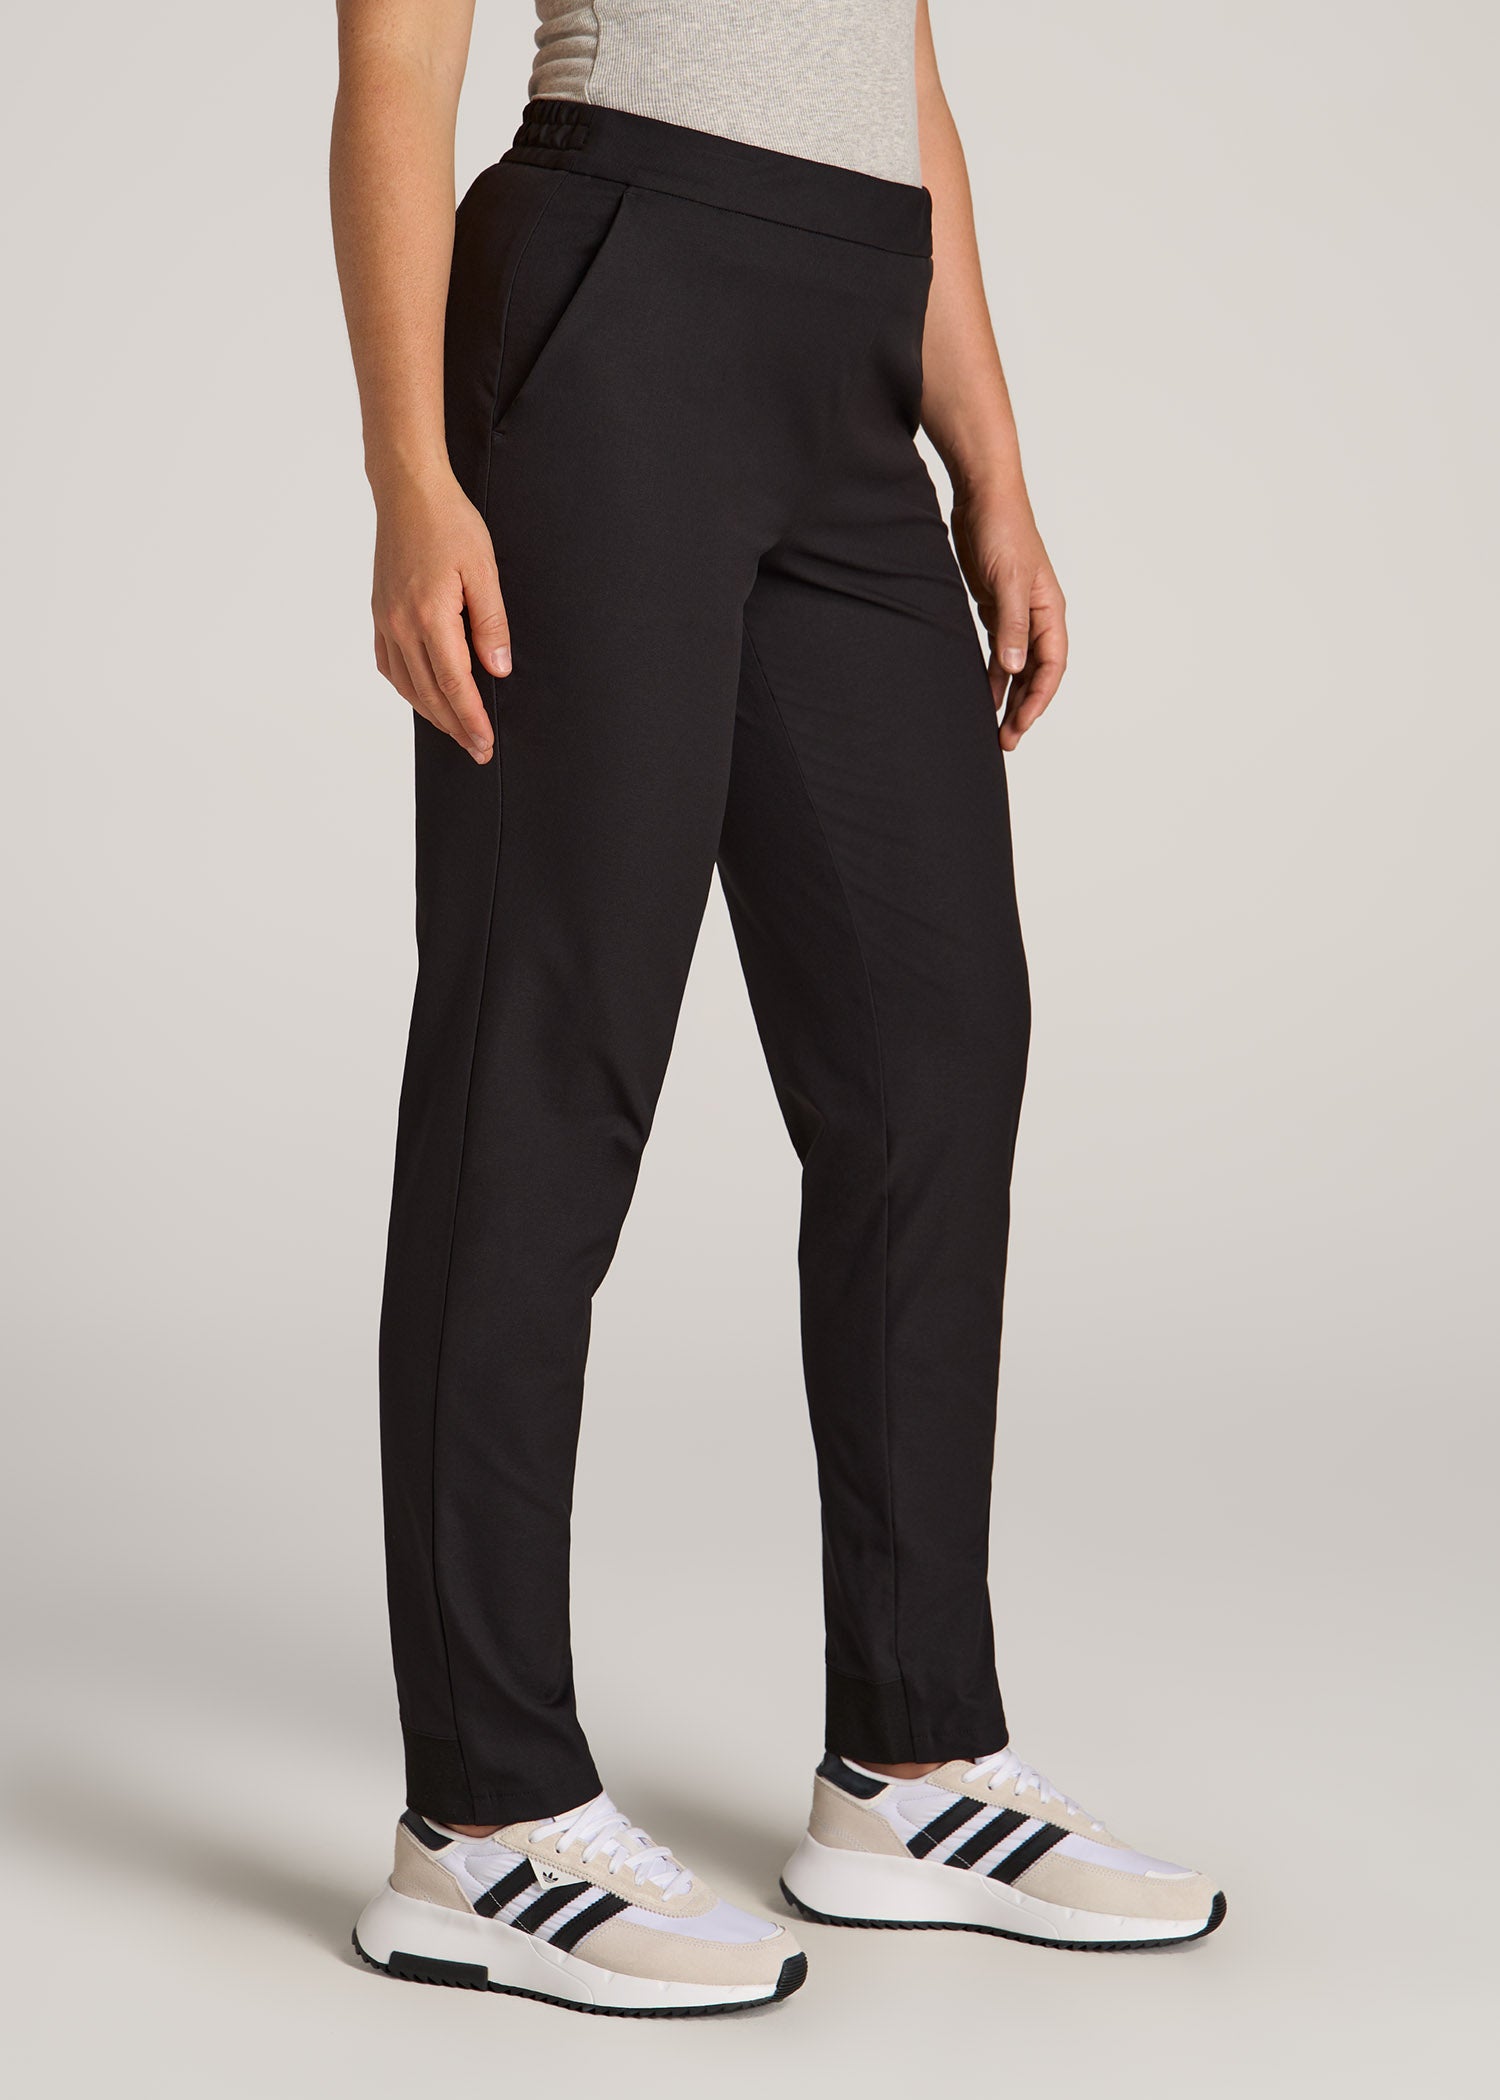 Ladies Elastic Waist Pull-On Woven Pants with Side Pockets